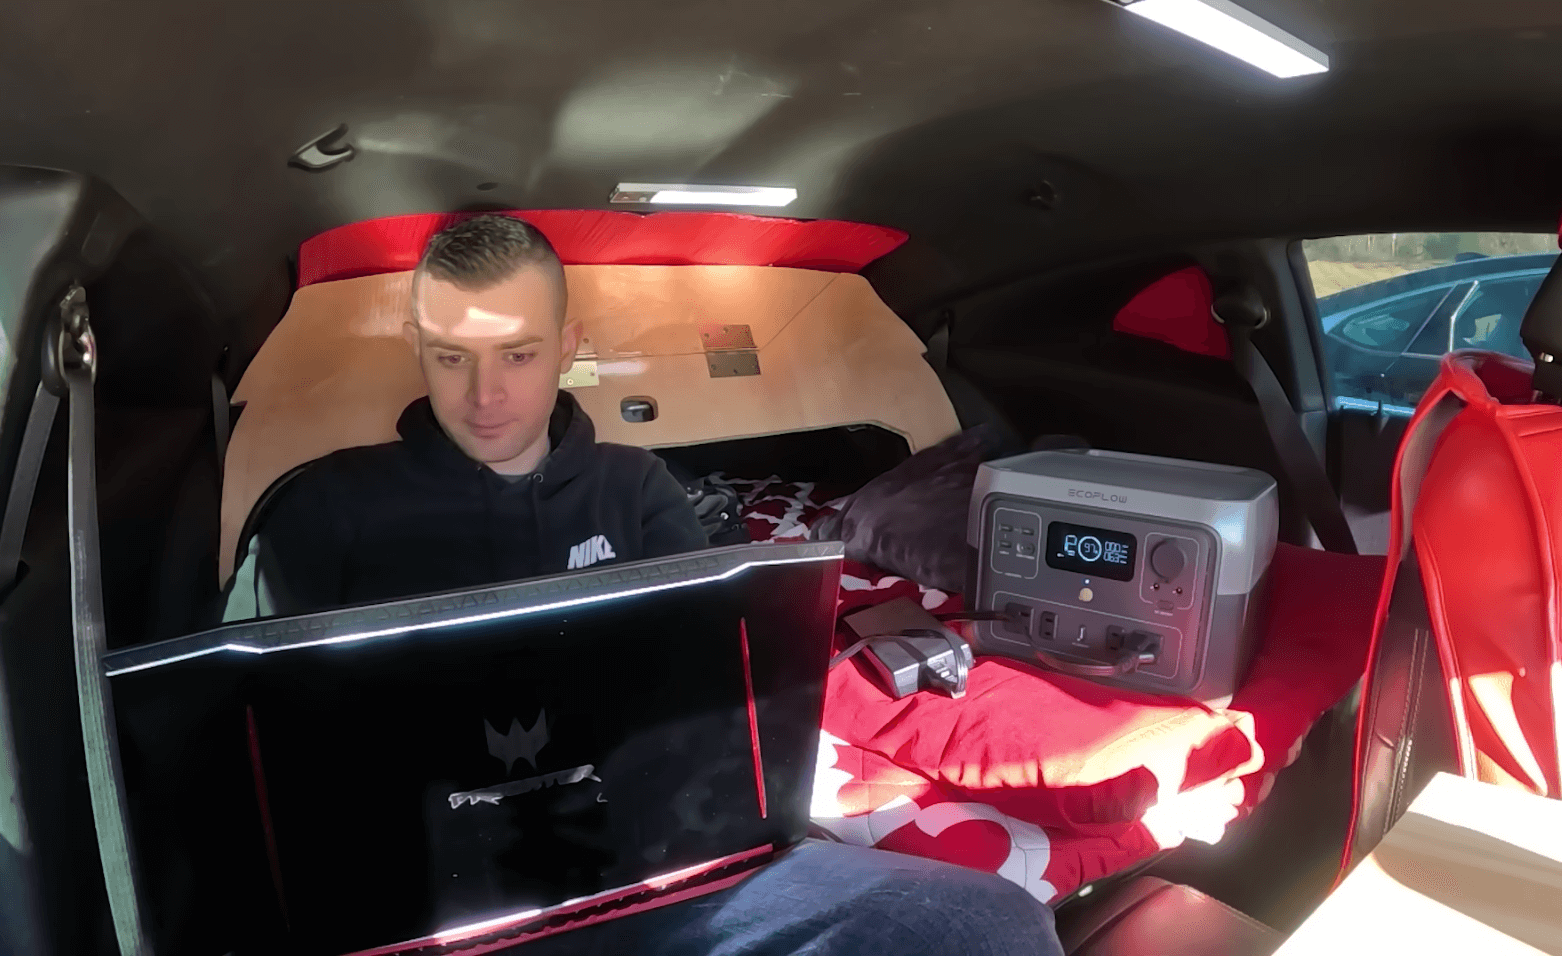 The Camaro Camper owner working on his laptop in the car.